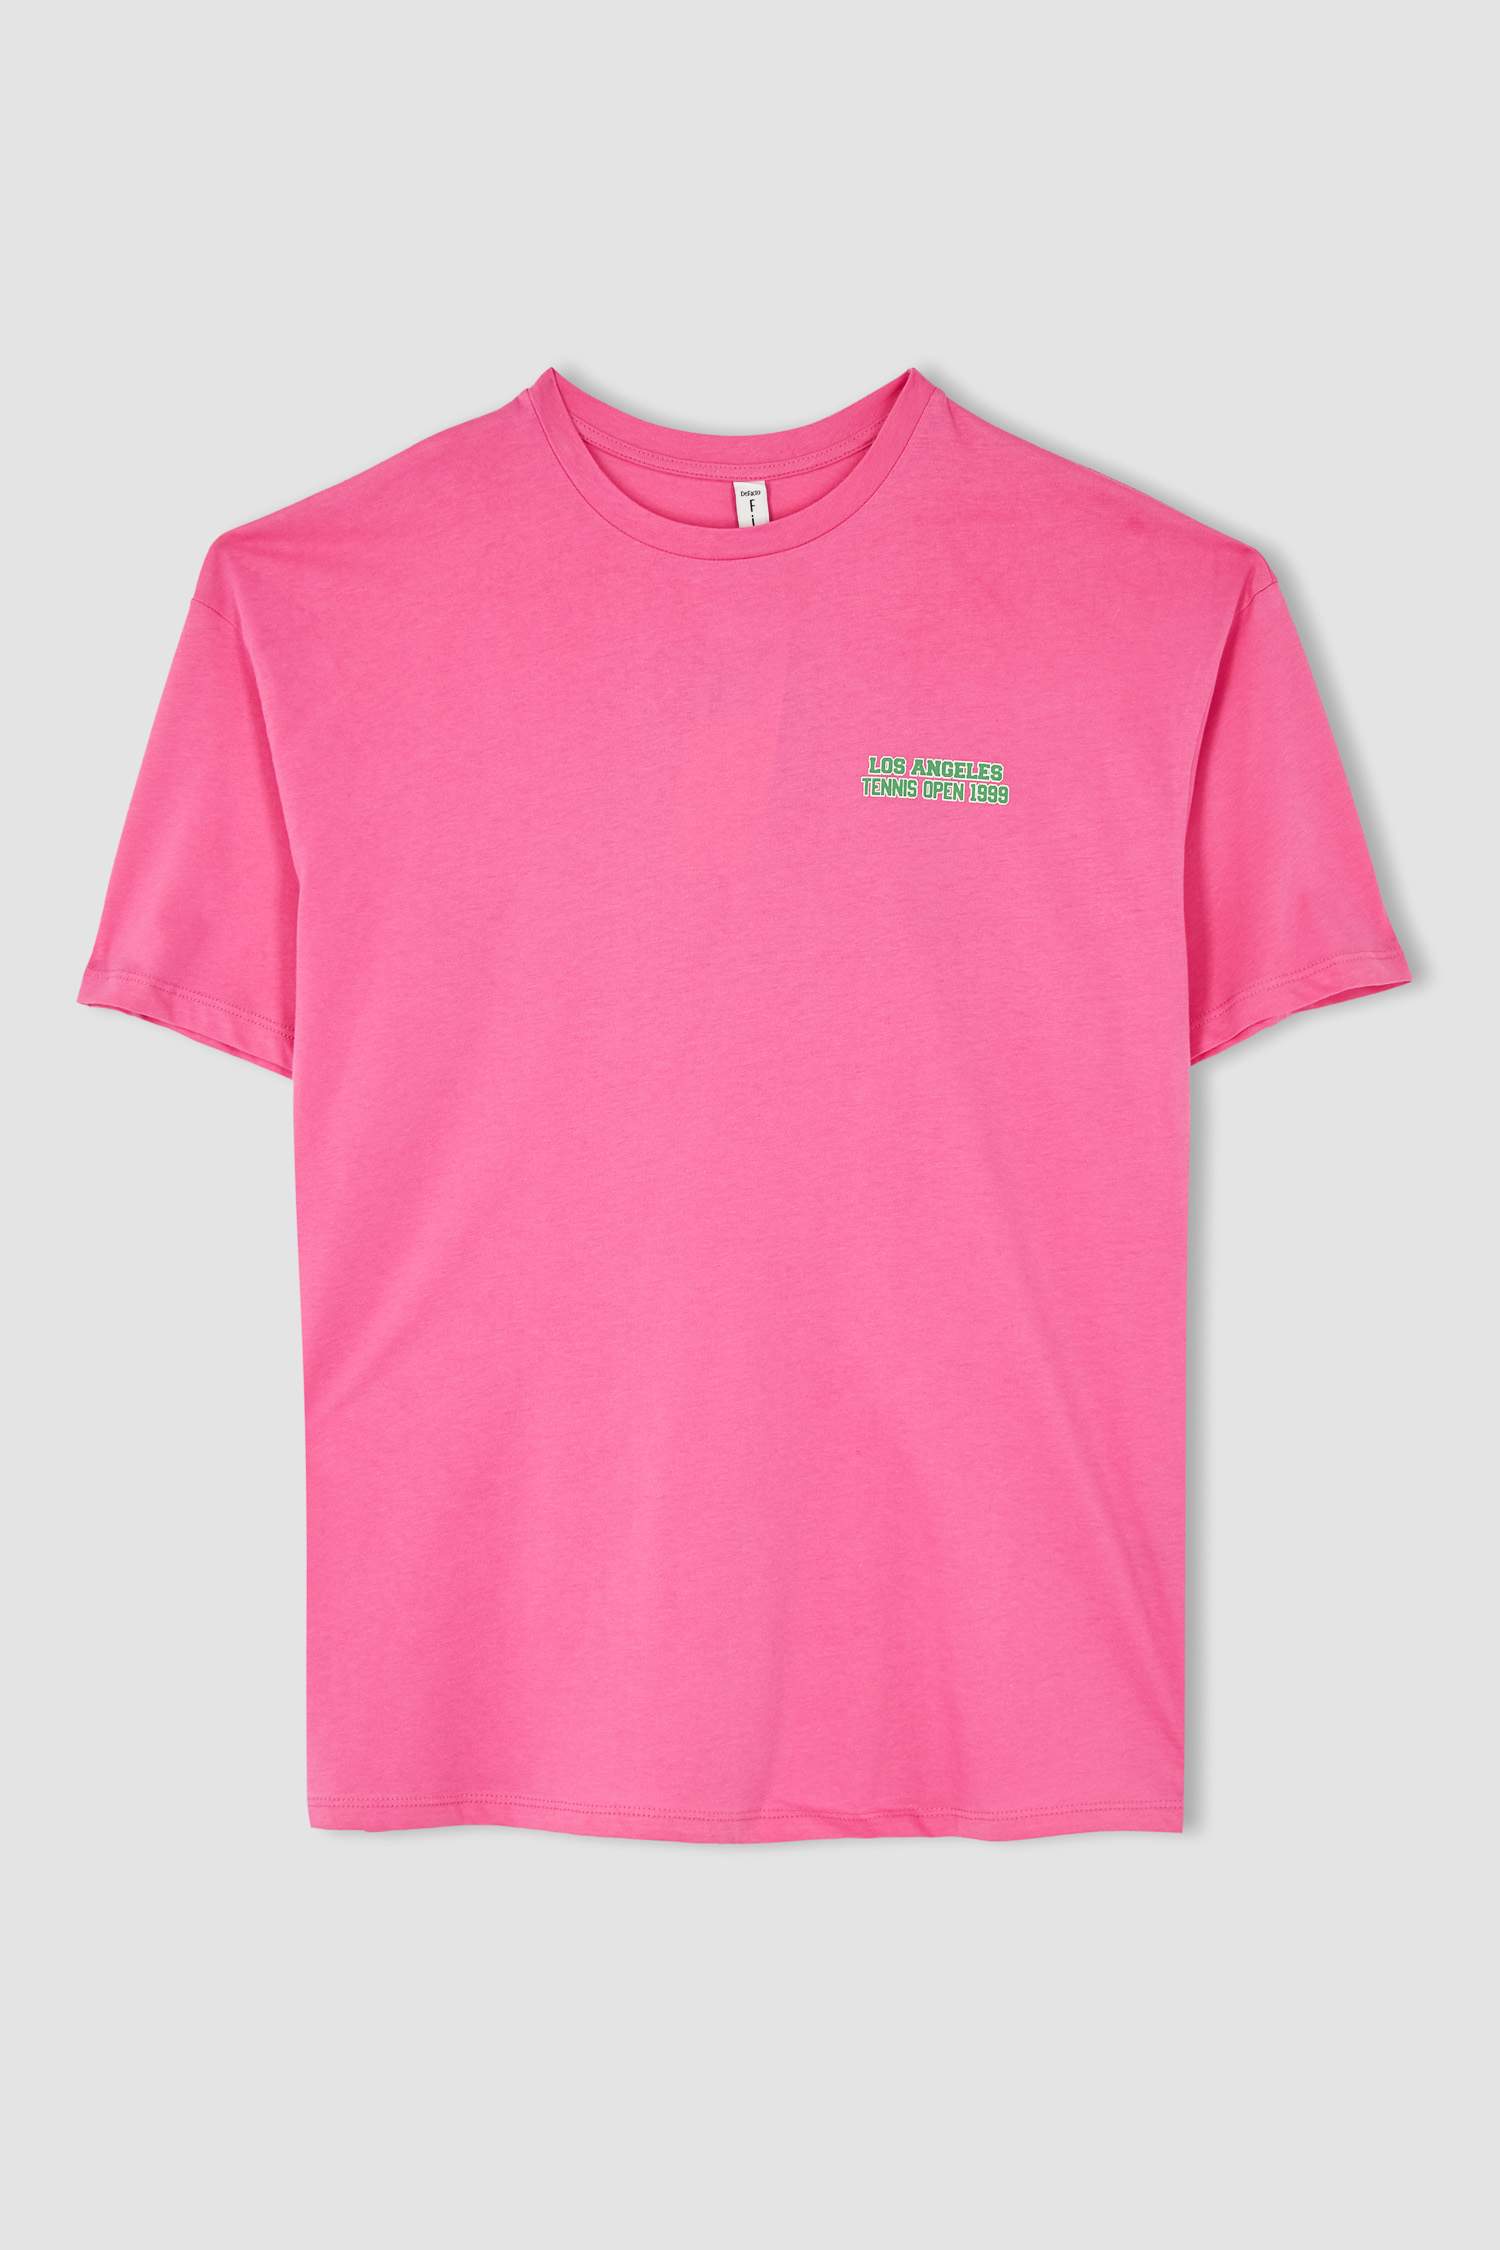 Los Angeles Oversize T-Shirt (Pink)